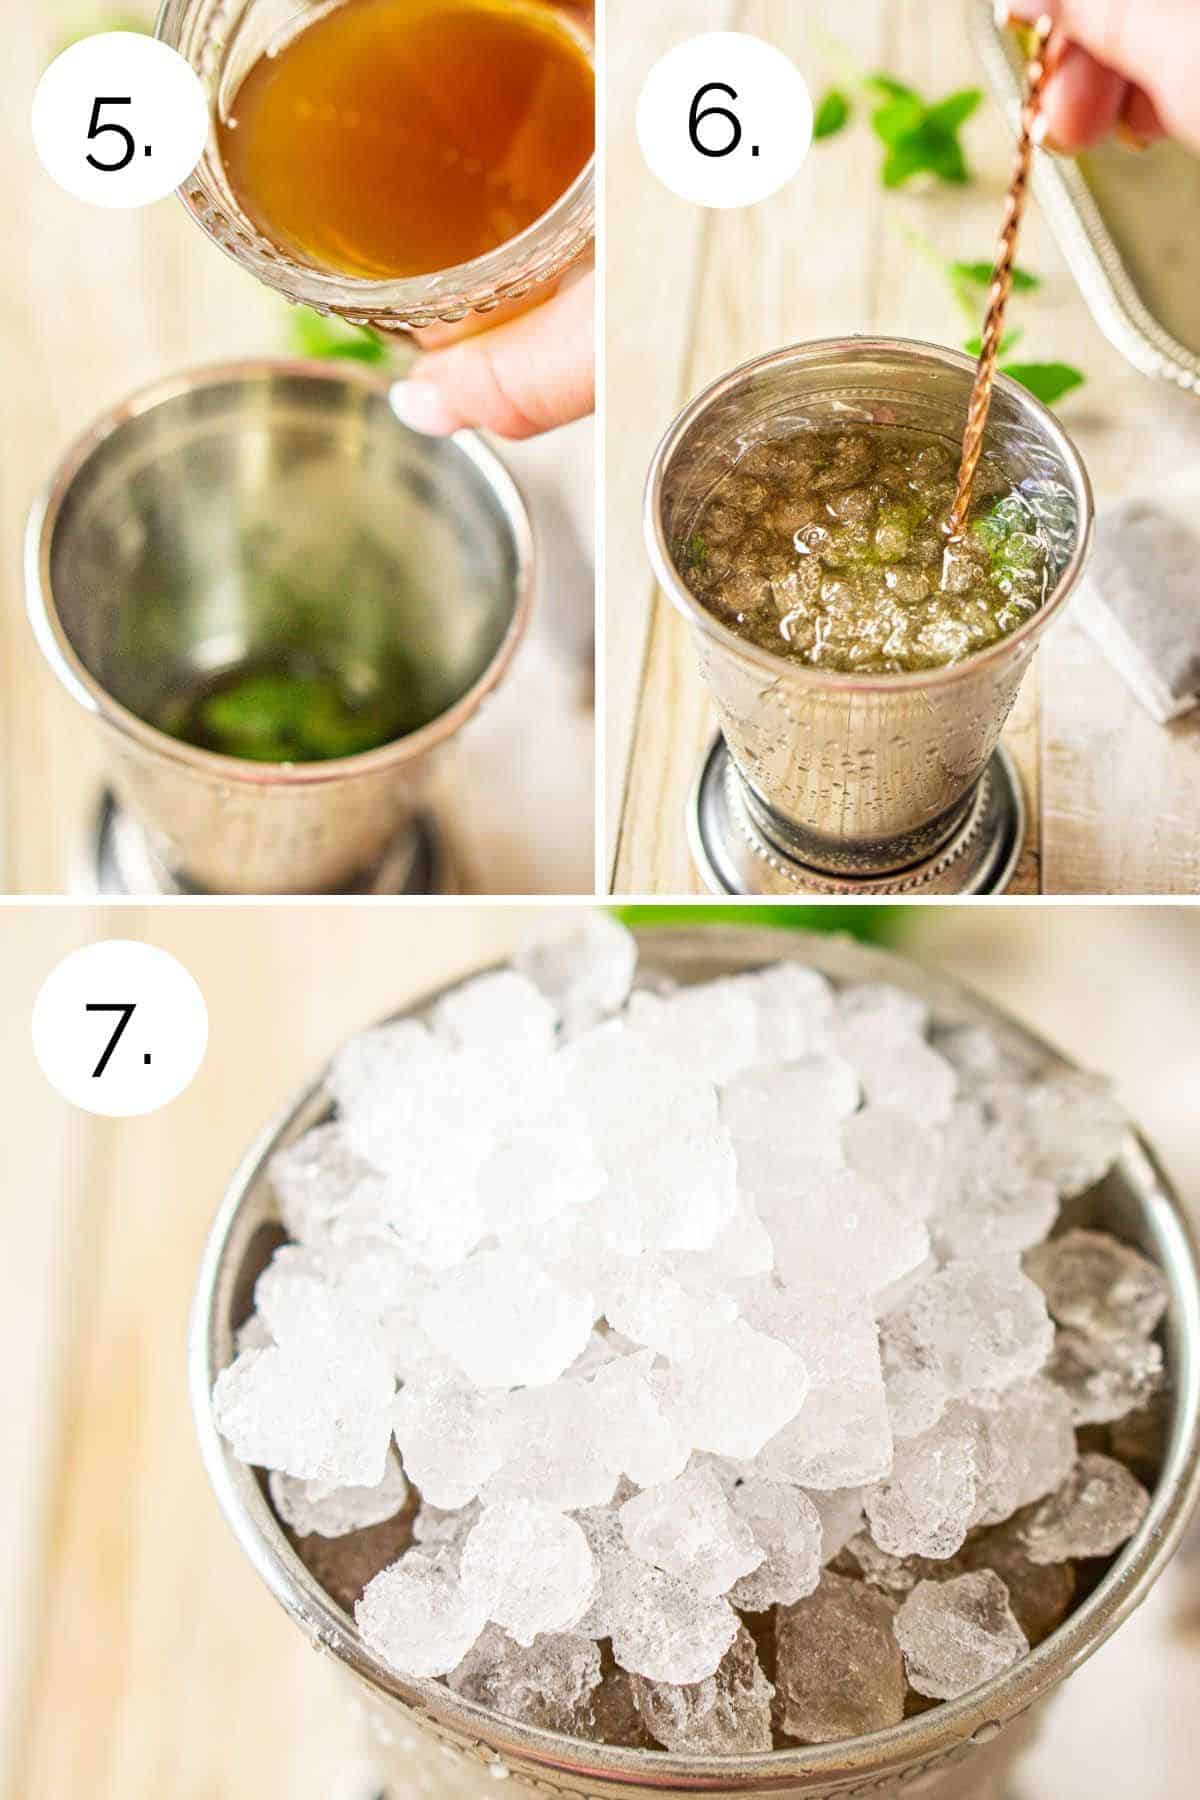 A collage showing the process of adding the ice and stirring the sweet tea mint julep.